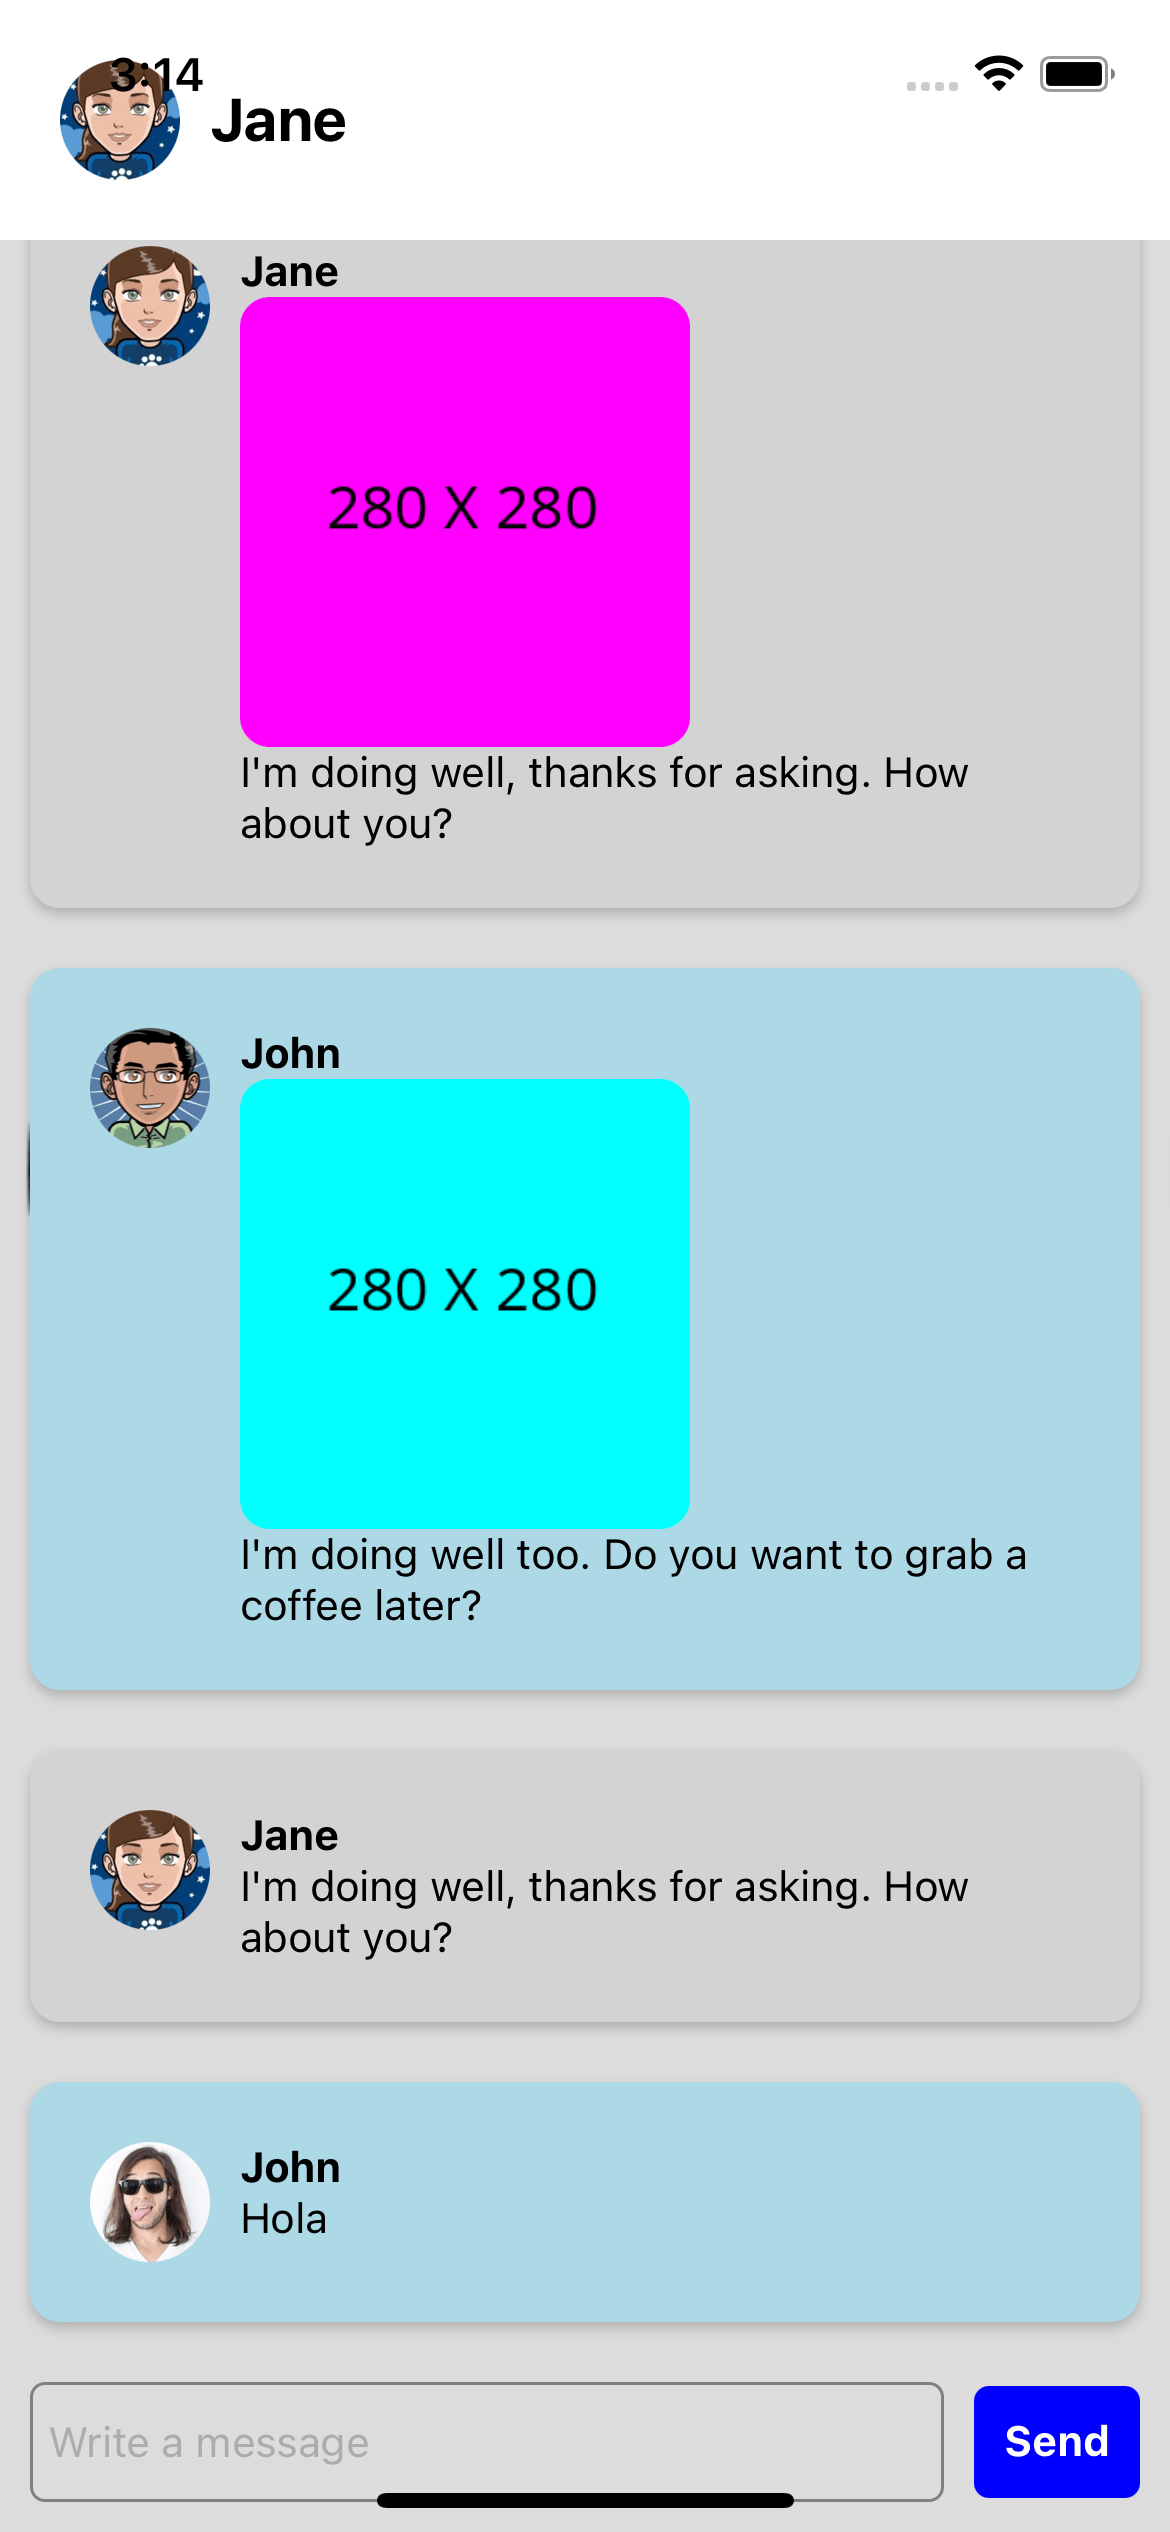 React native template. Chat with background image cards